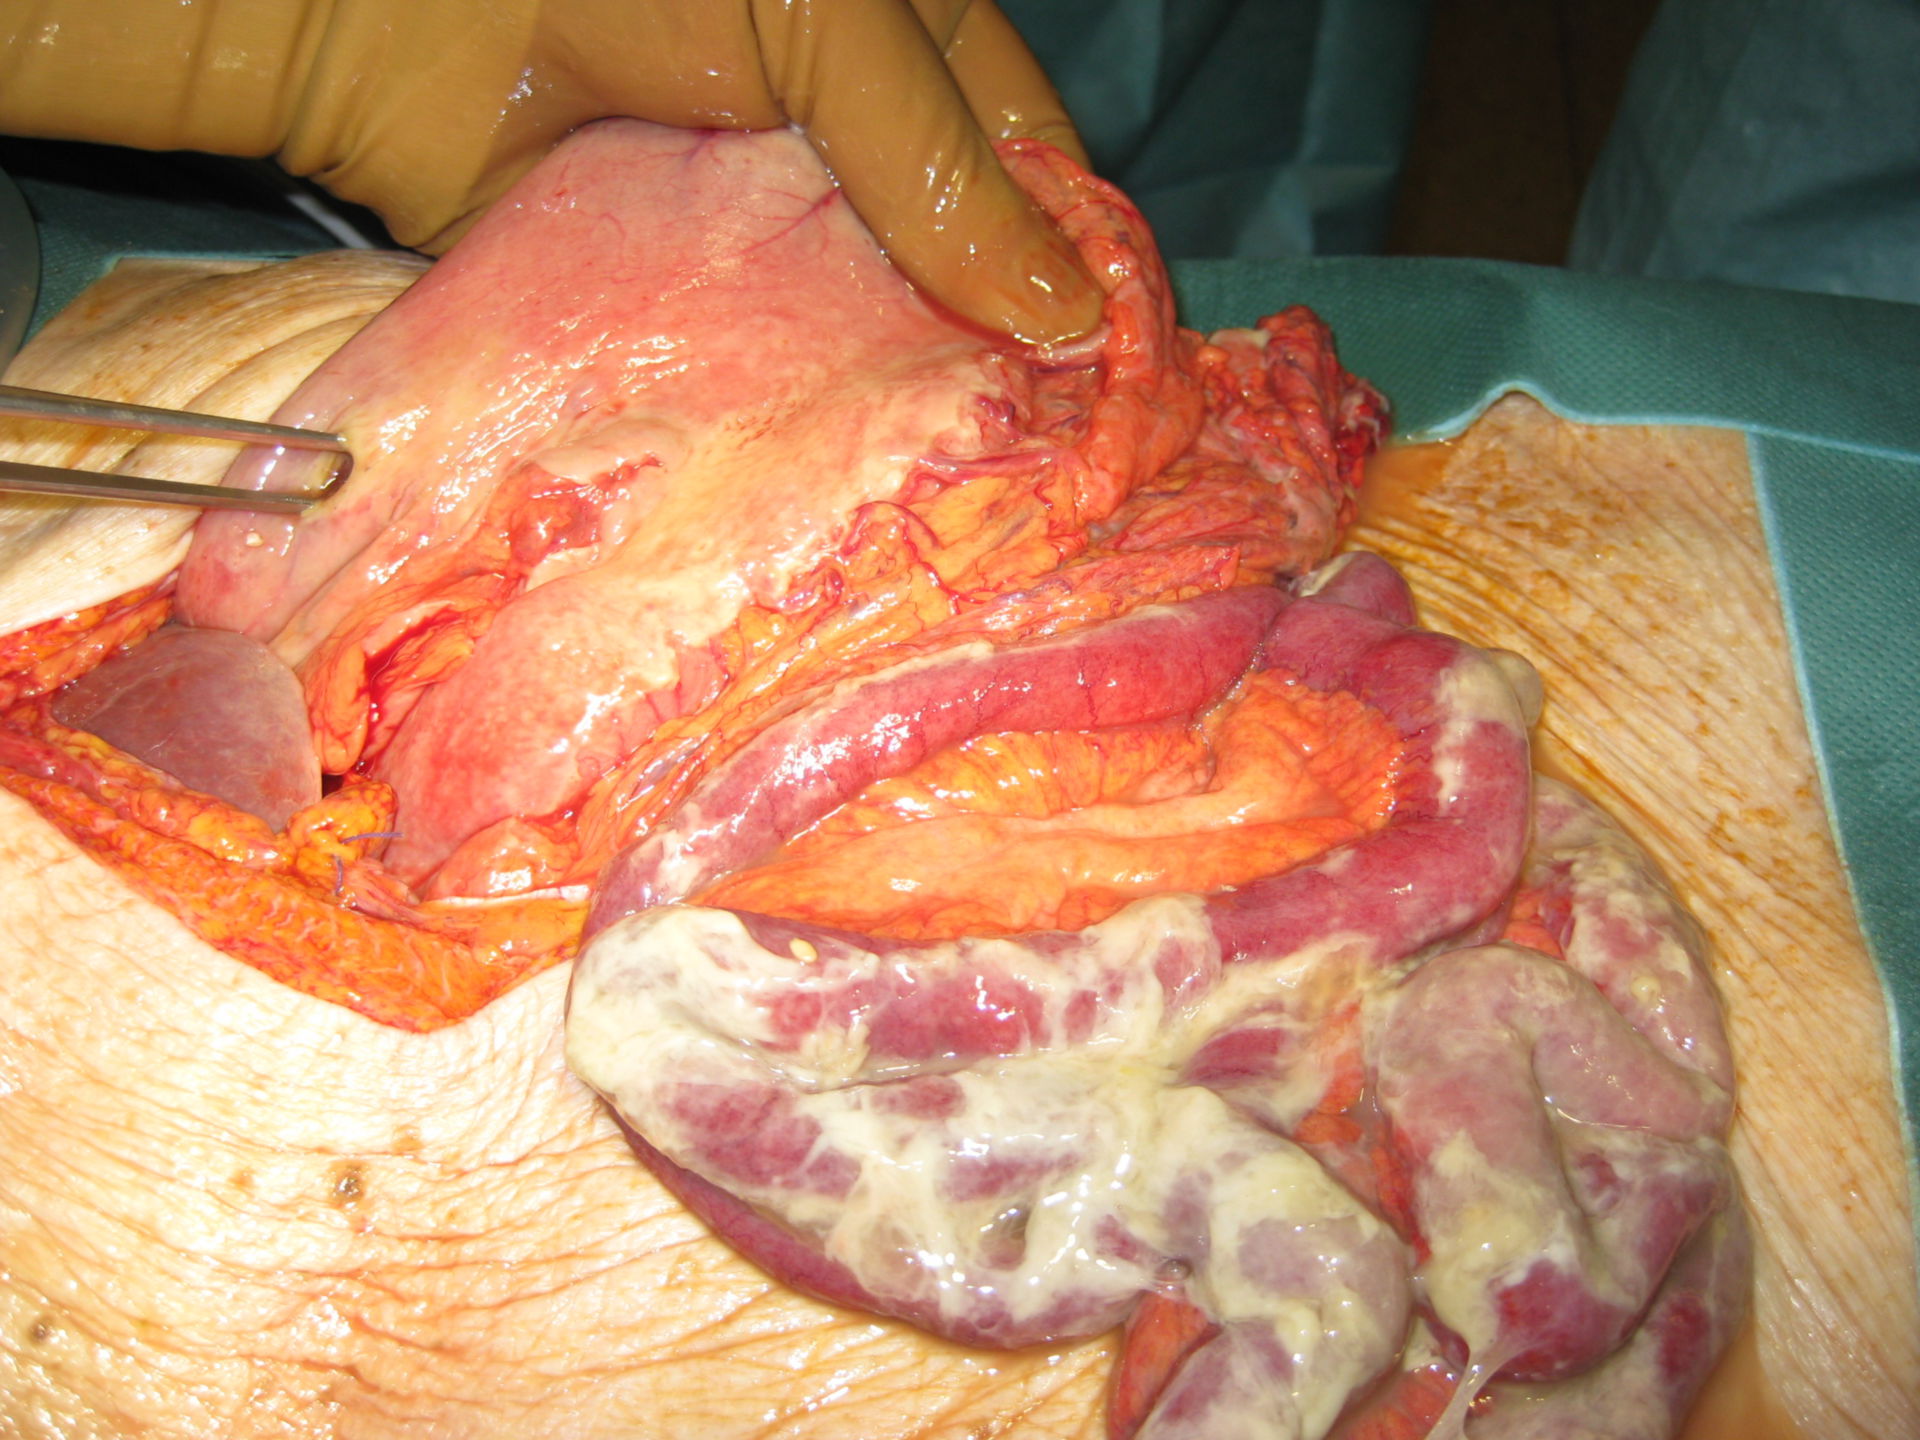 Gastric perforation leading to diffuse peritonitis